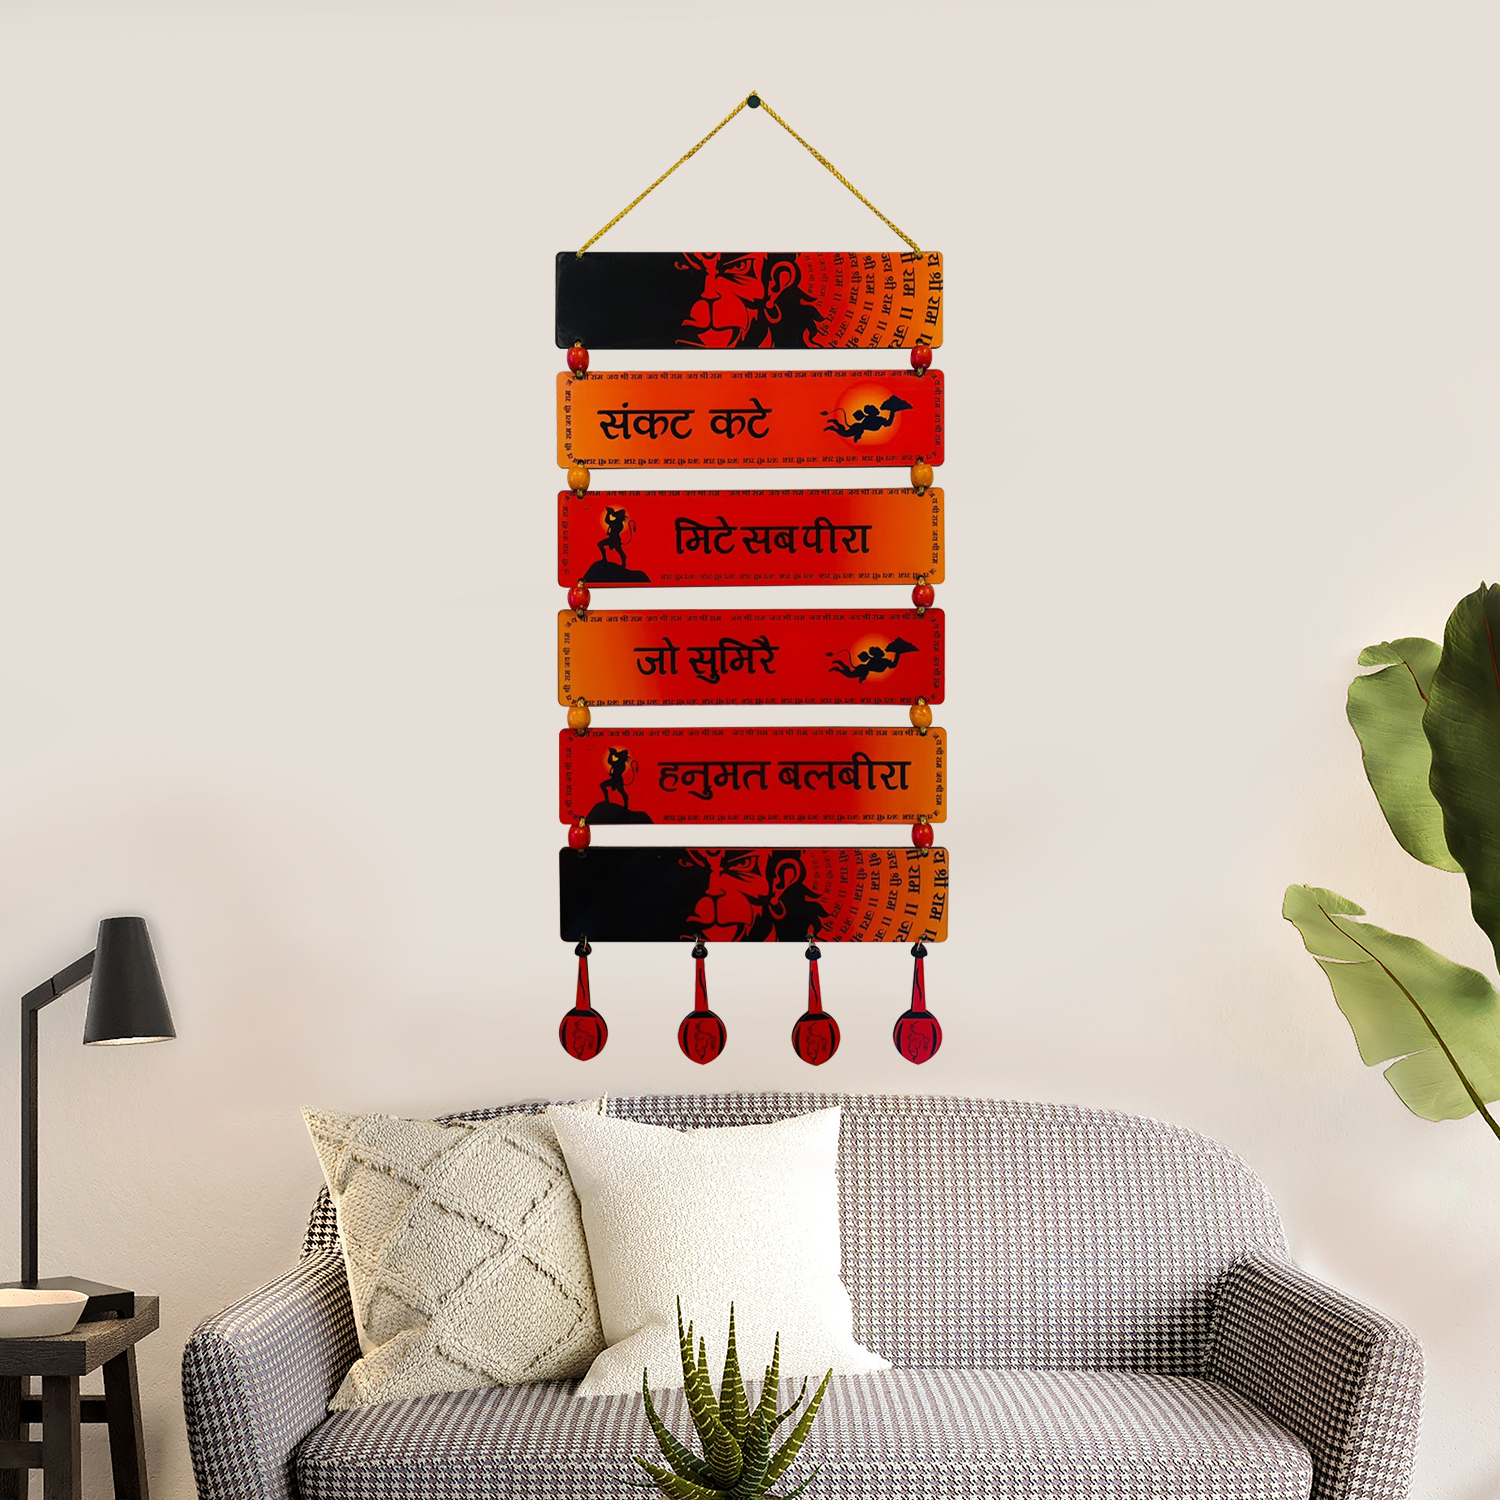 BookYourGift - Buy 6 Layer Wall Hanging Home Decor, Buy 6 Layer Wall Hanging Item for Living Room